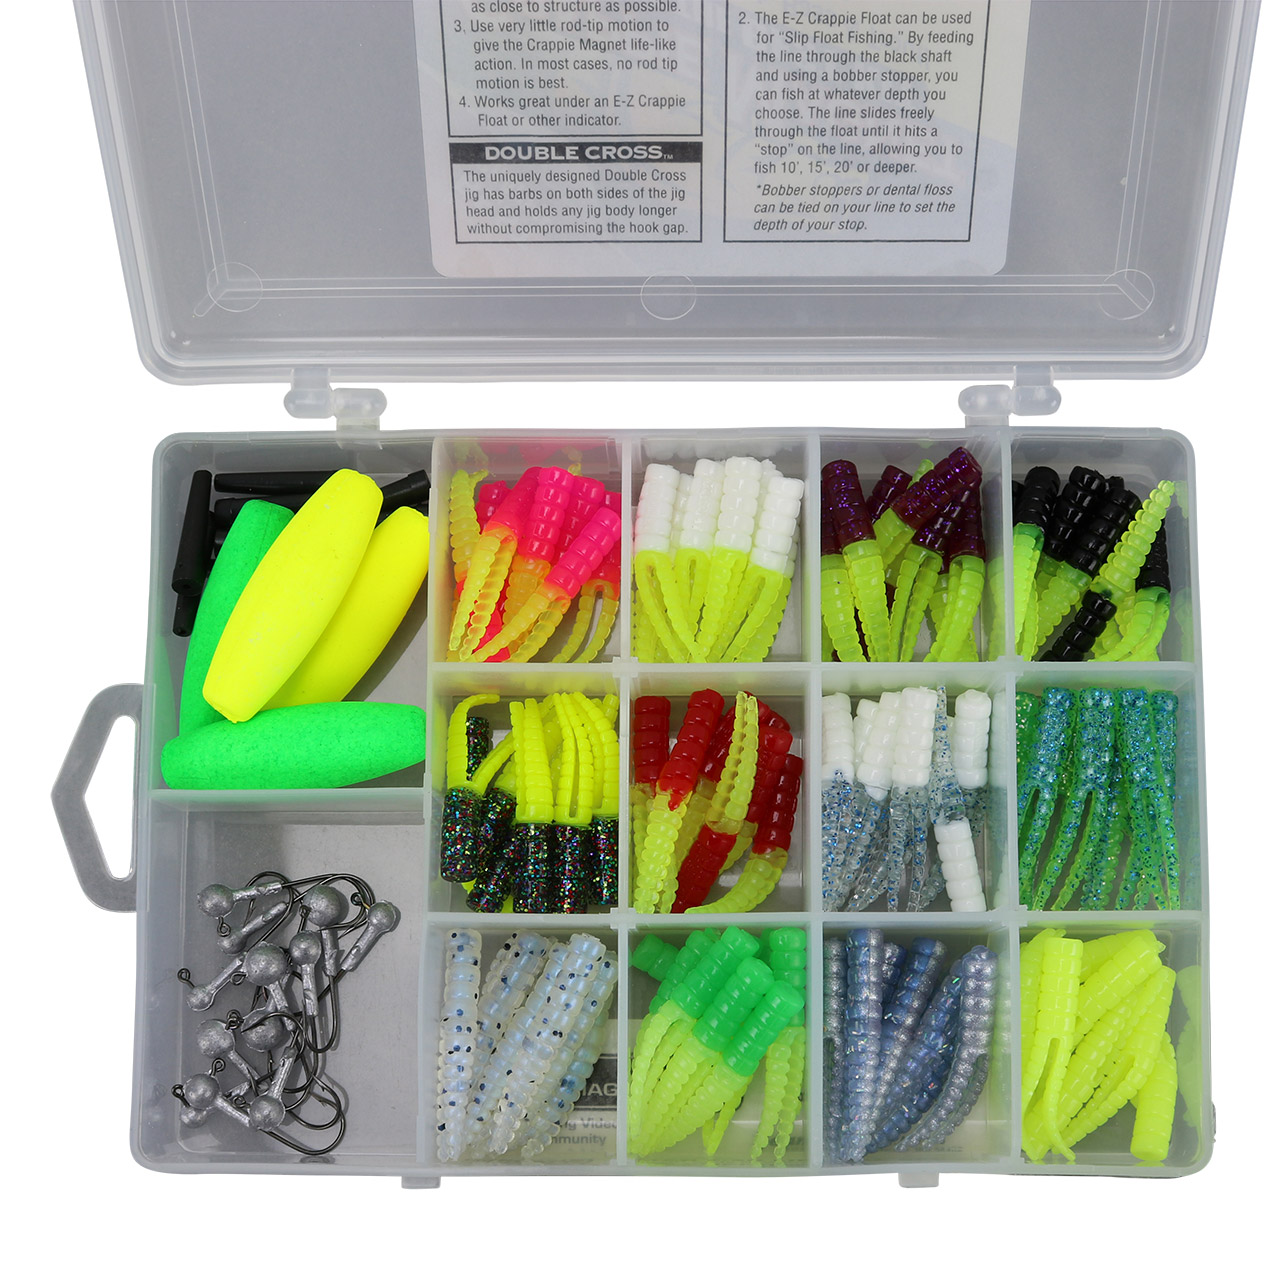 Crappie Magnet Tackle Pack Kit - Fishing Lures, Jig Hooks, Split Shots -  Designed to Catch Any Fish Including Bass, Crappie, Trout and More -  Portable All Species Fishing Tackle Box: Buy